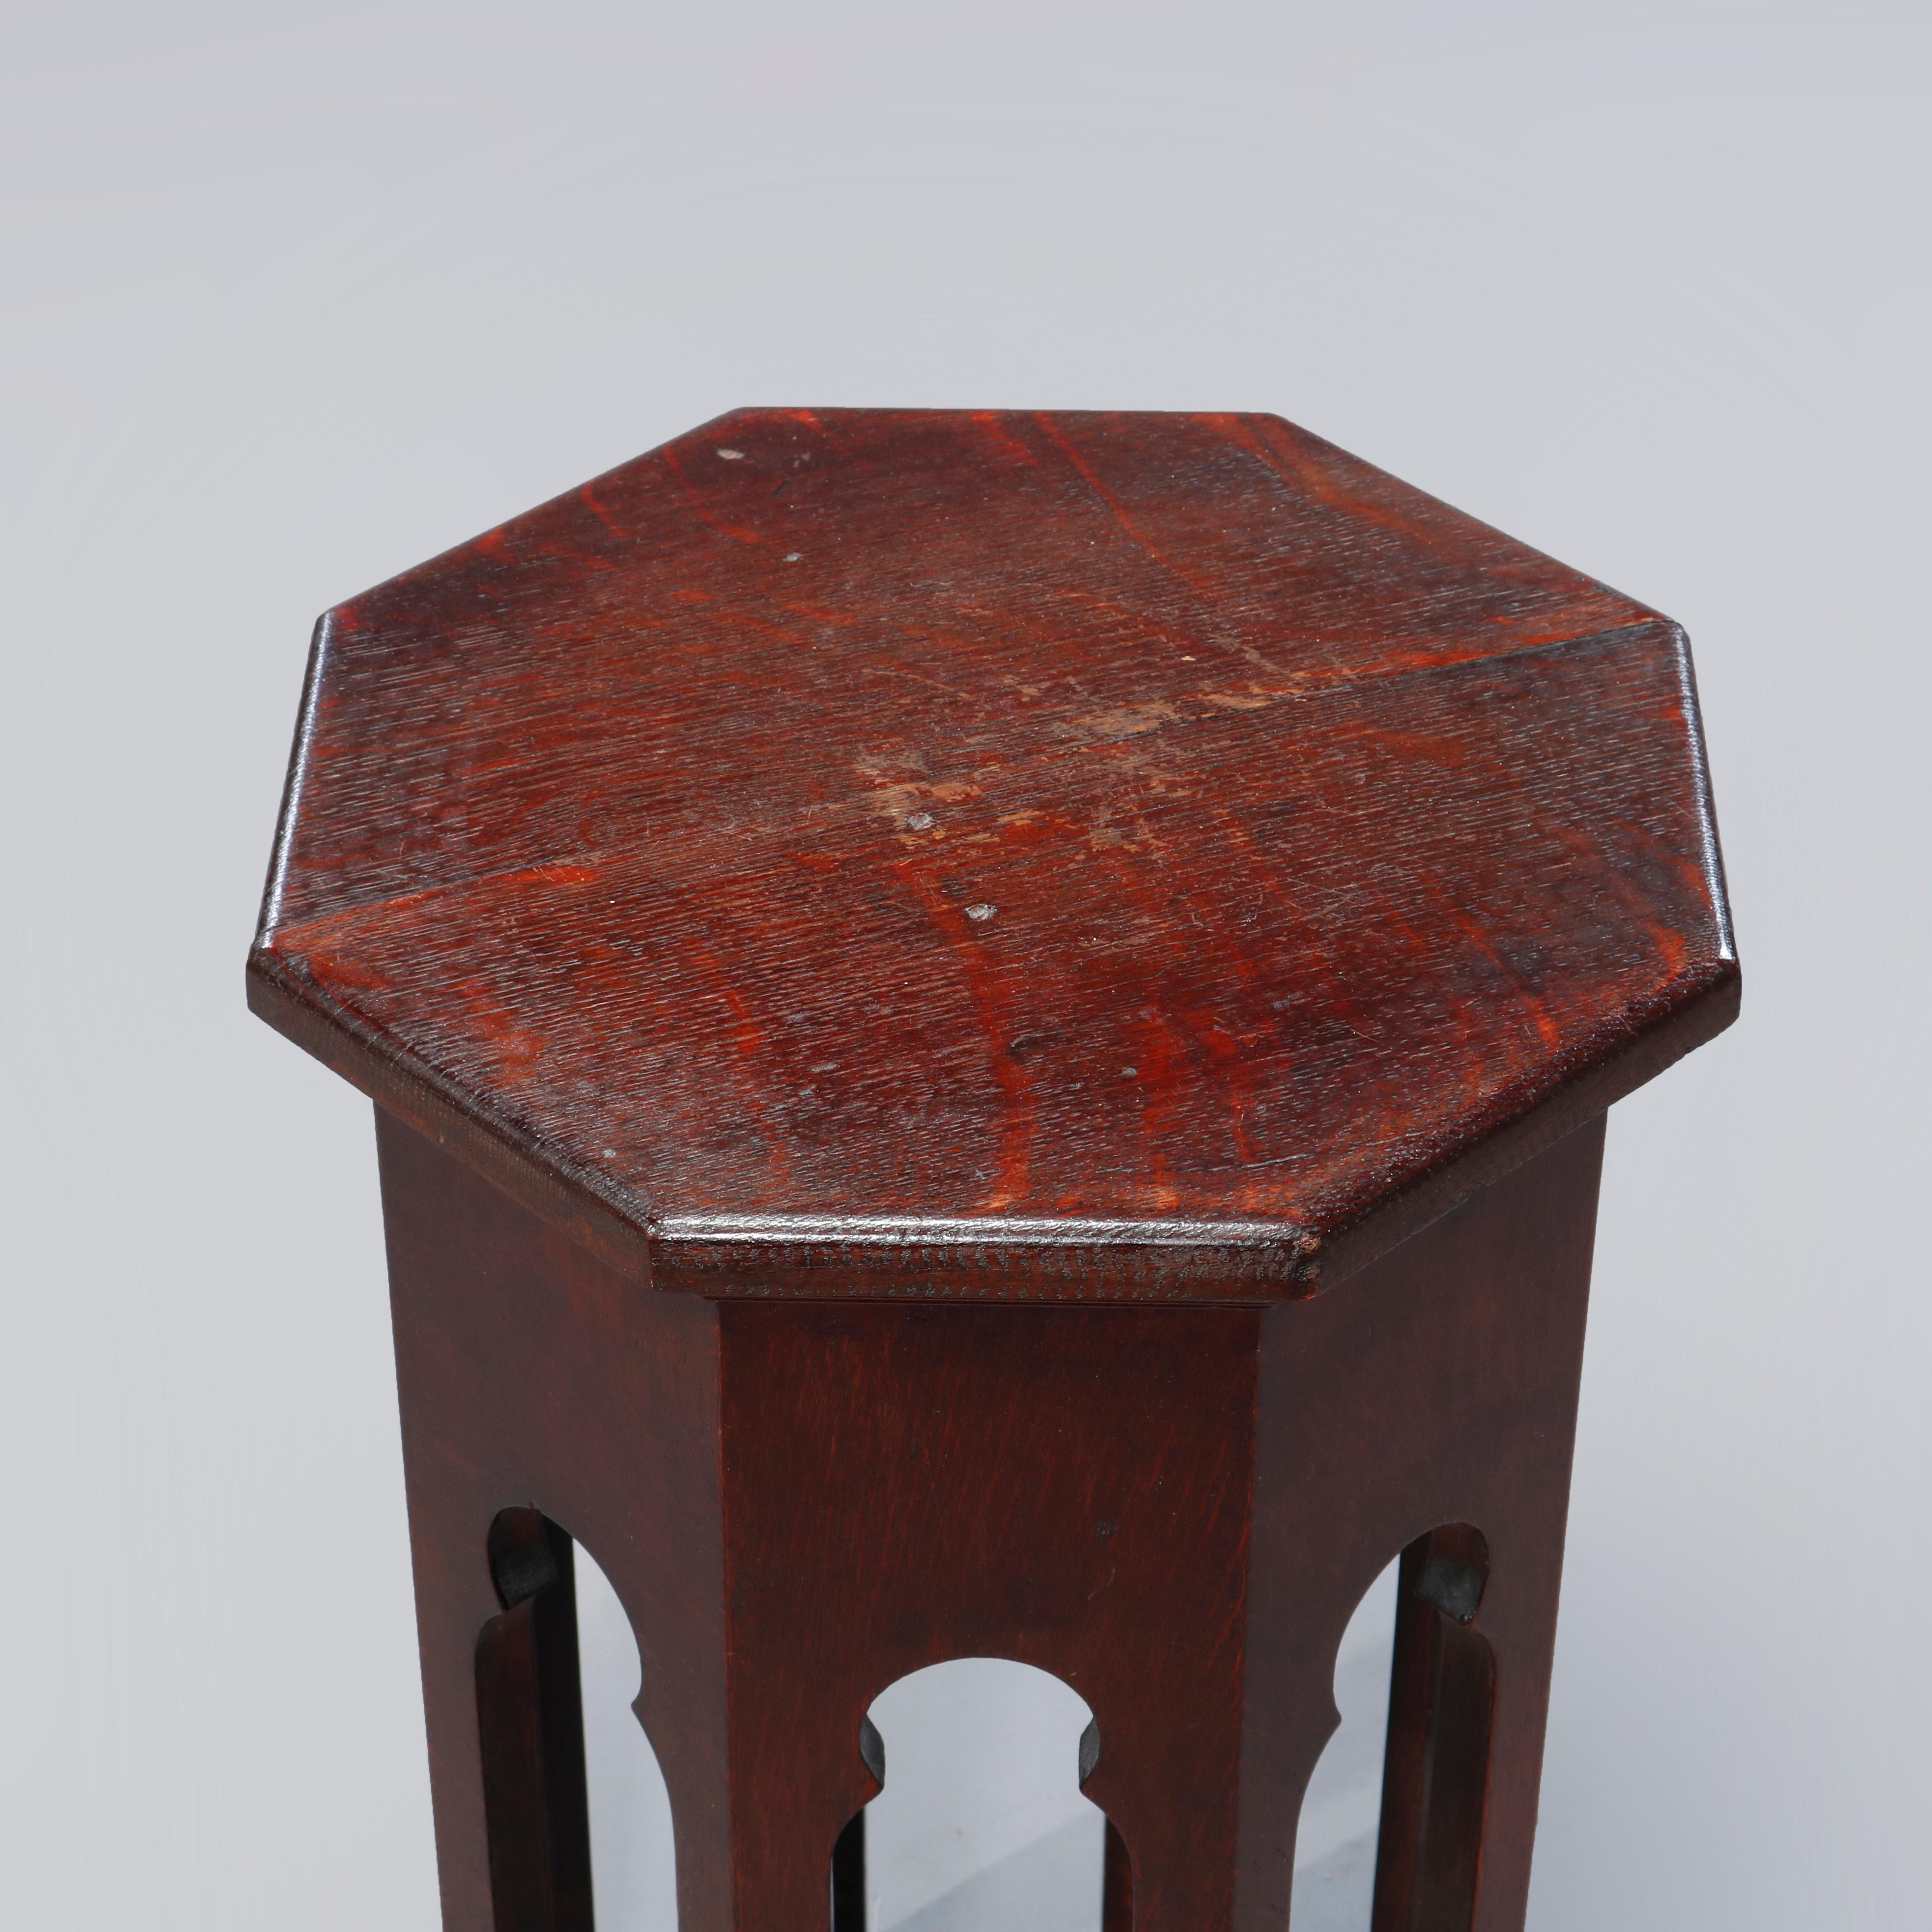 An Arts & Crafts tabouret stand in the manner of Gustav Stickley Tobey offers octagonal top over cutout Gothic cathedral arch form legs, c1910.

Measures: 25